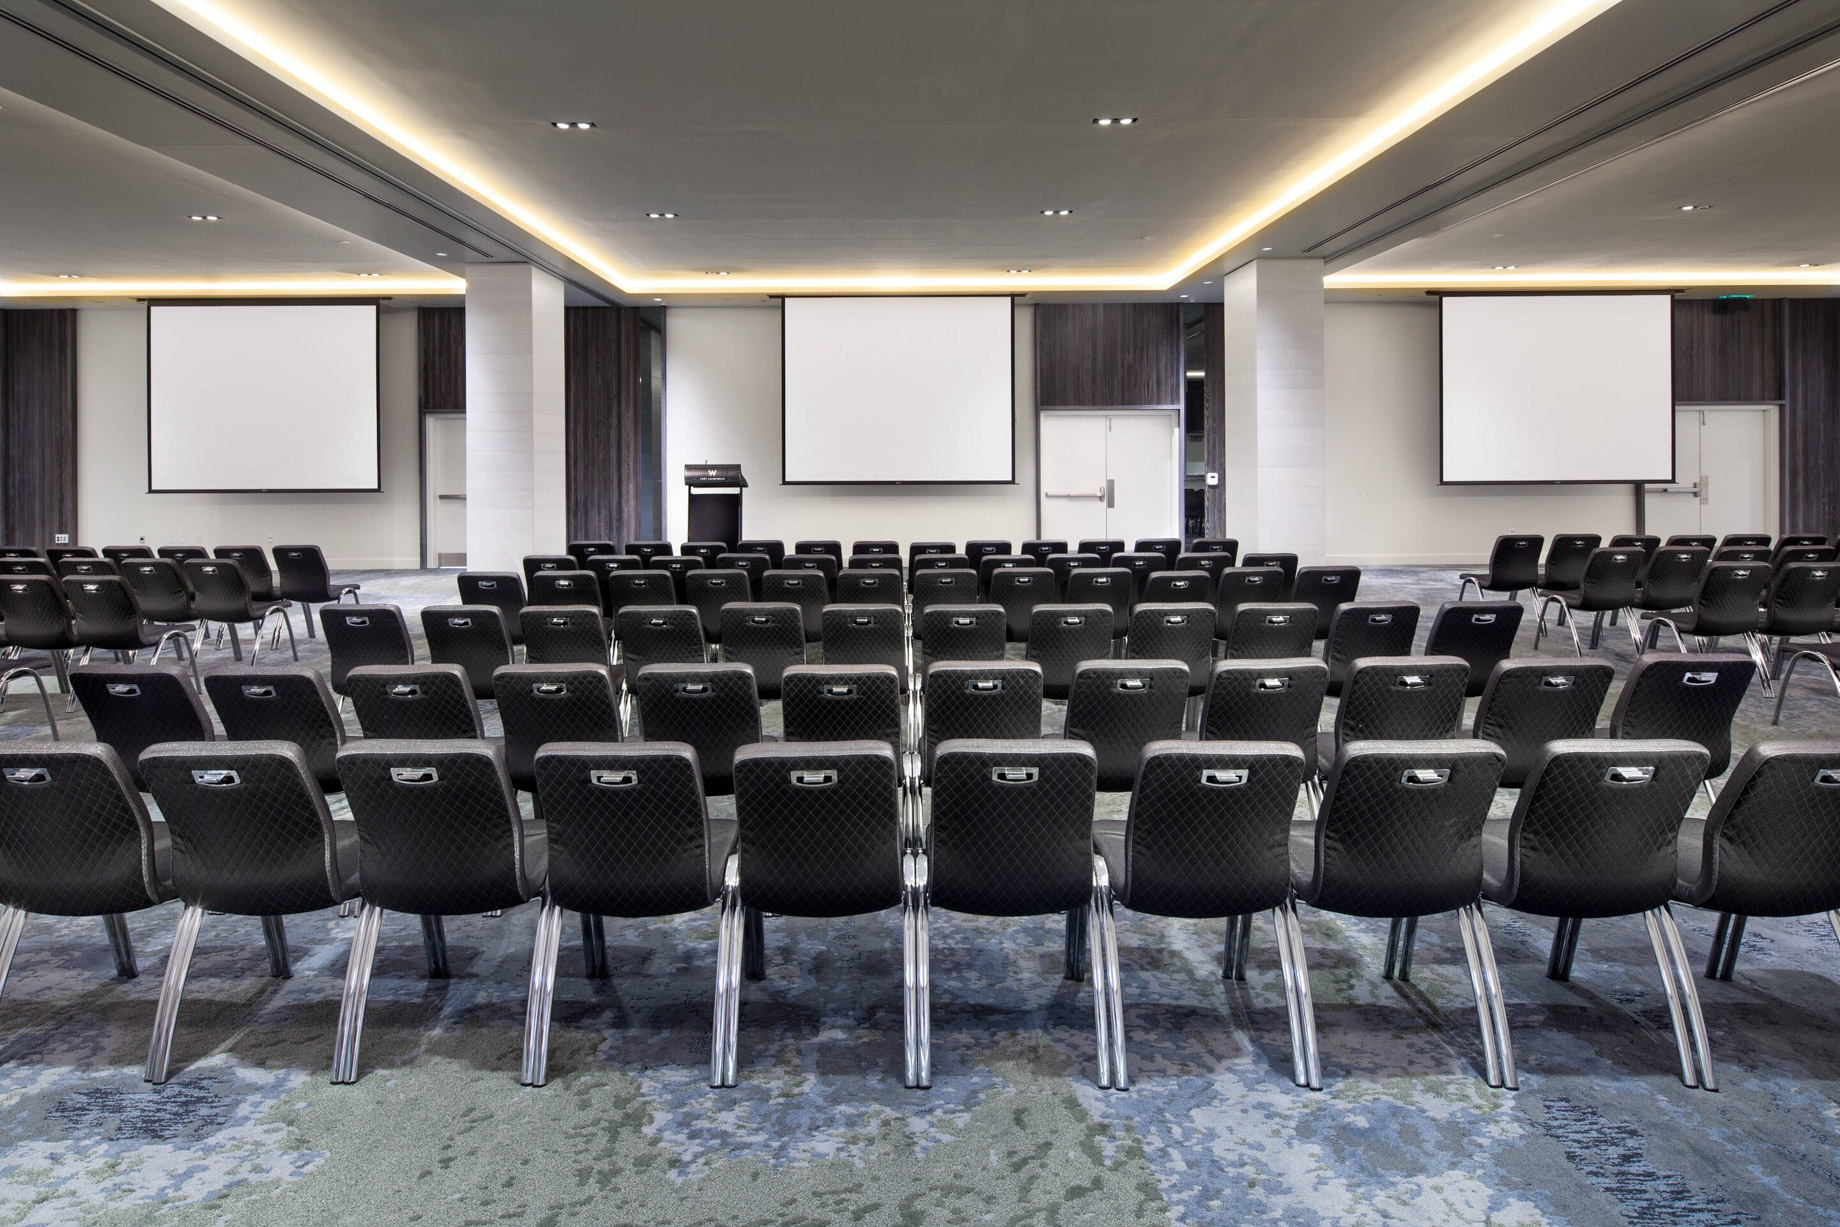 W Fort Lauderdale Hotel - Fort Lauderdale, FL, USA - Mingle Meeting Room Theater Setup